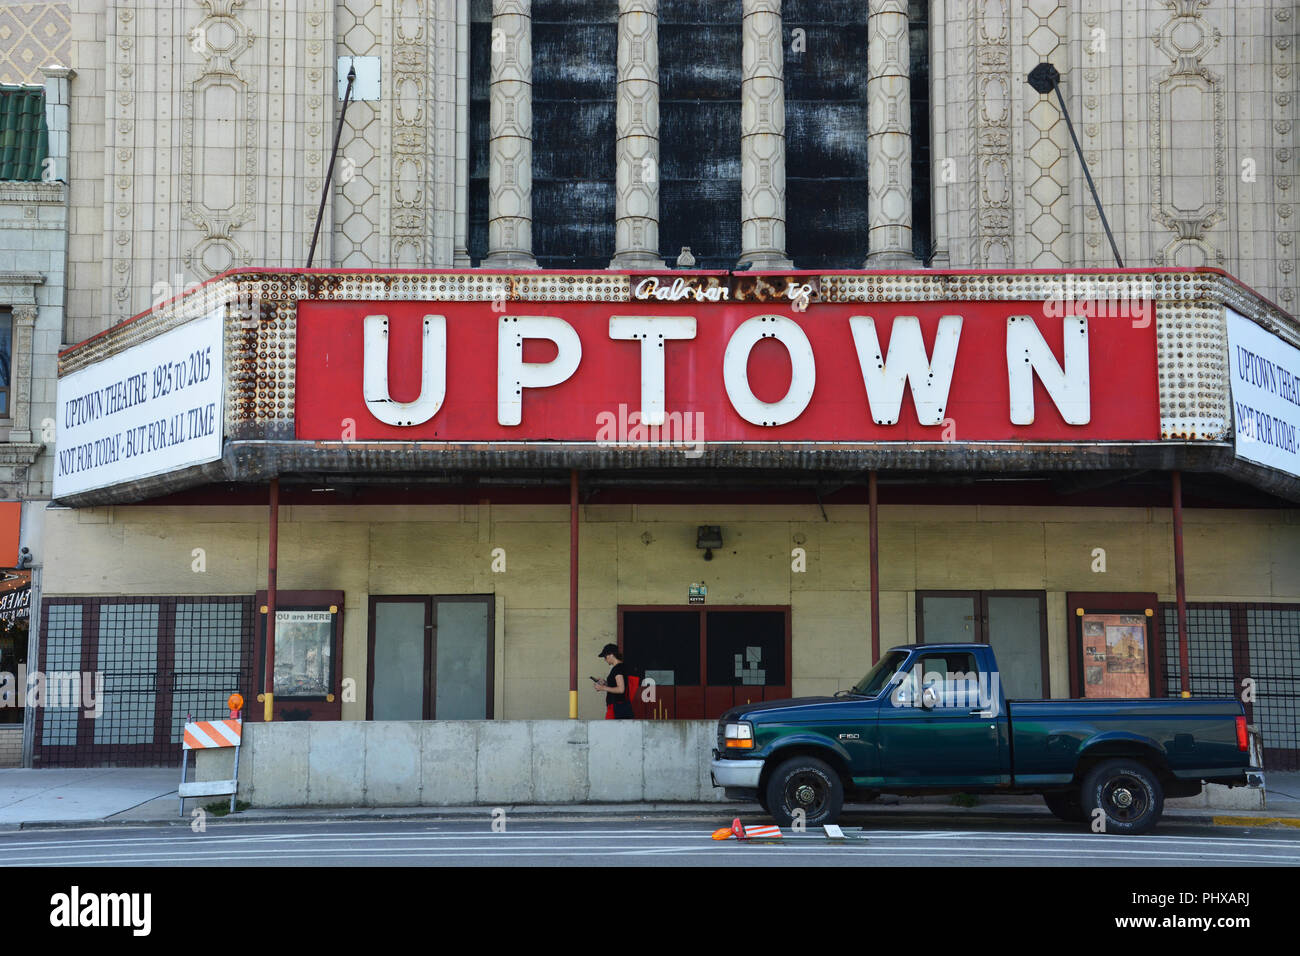 Opened in 1925, the Uptown Theater was a 4,381 seat movie palace and switch to live entertainment shows in the 1970's. The theater closed in 1981. Stock Photo